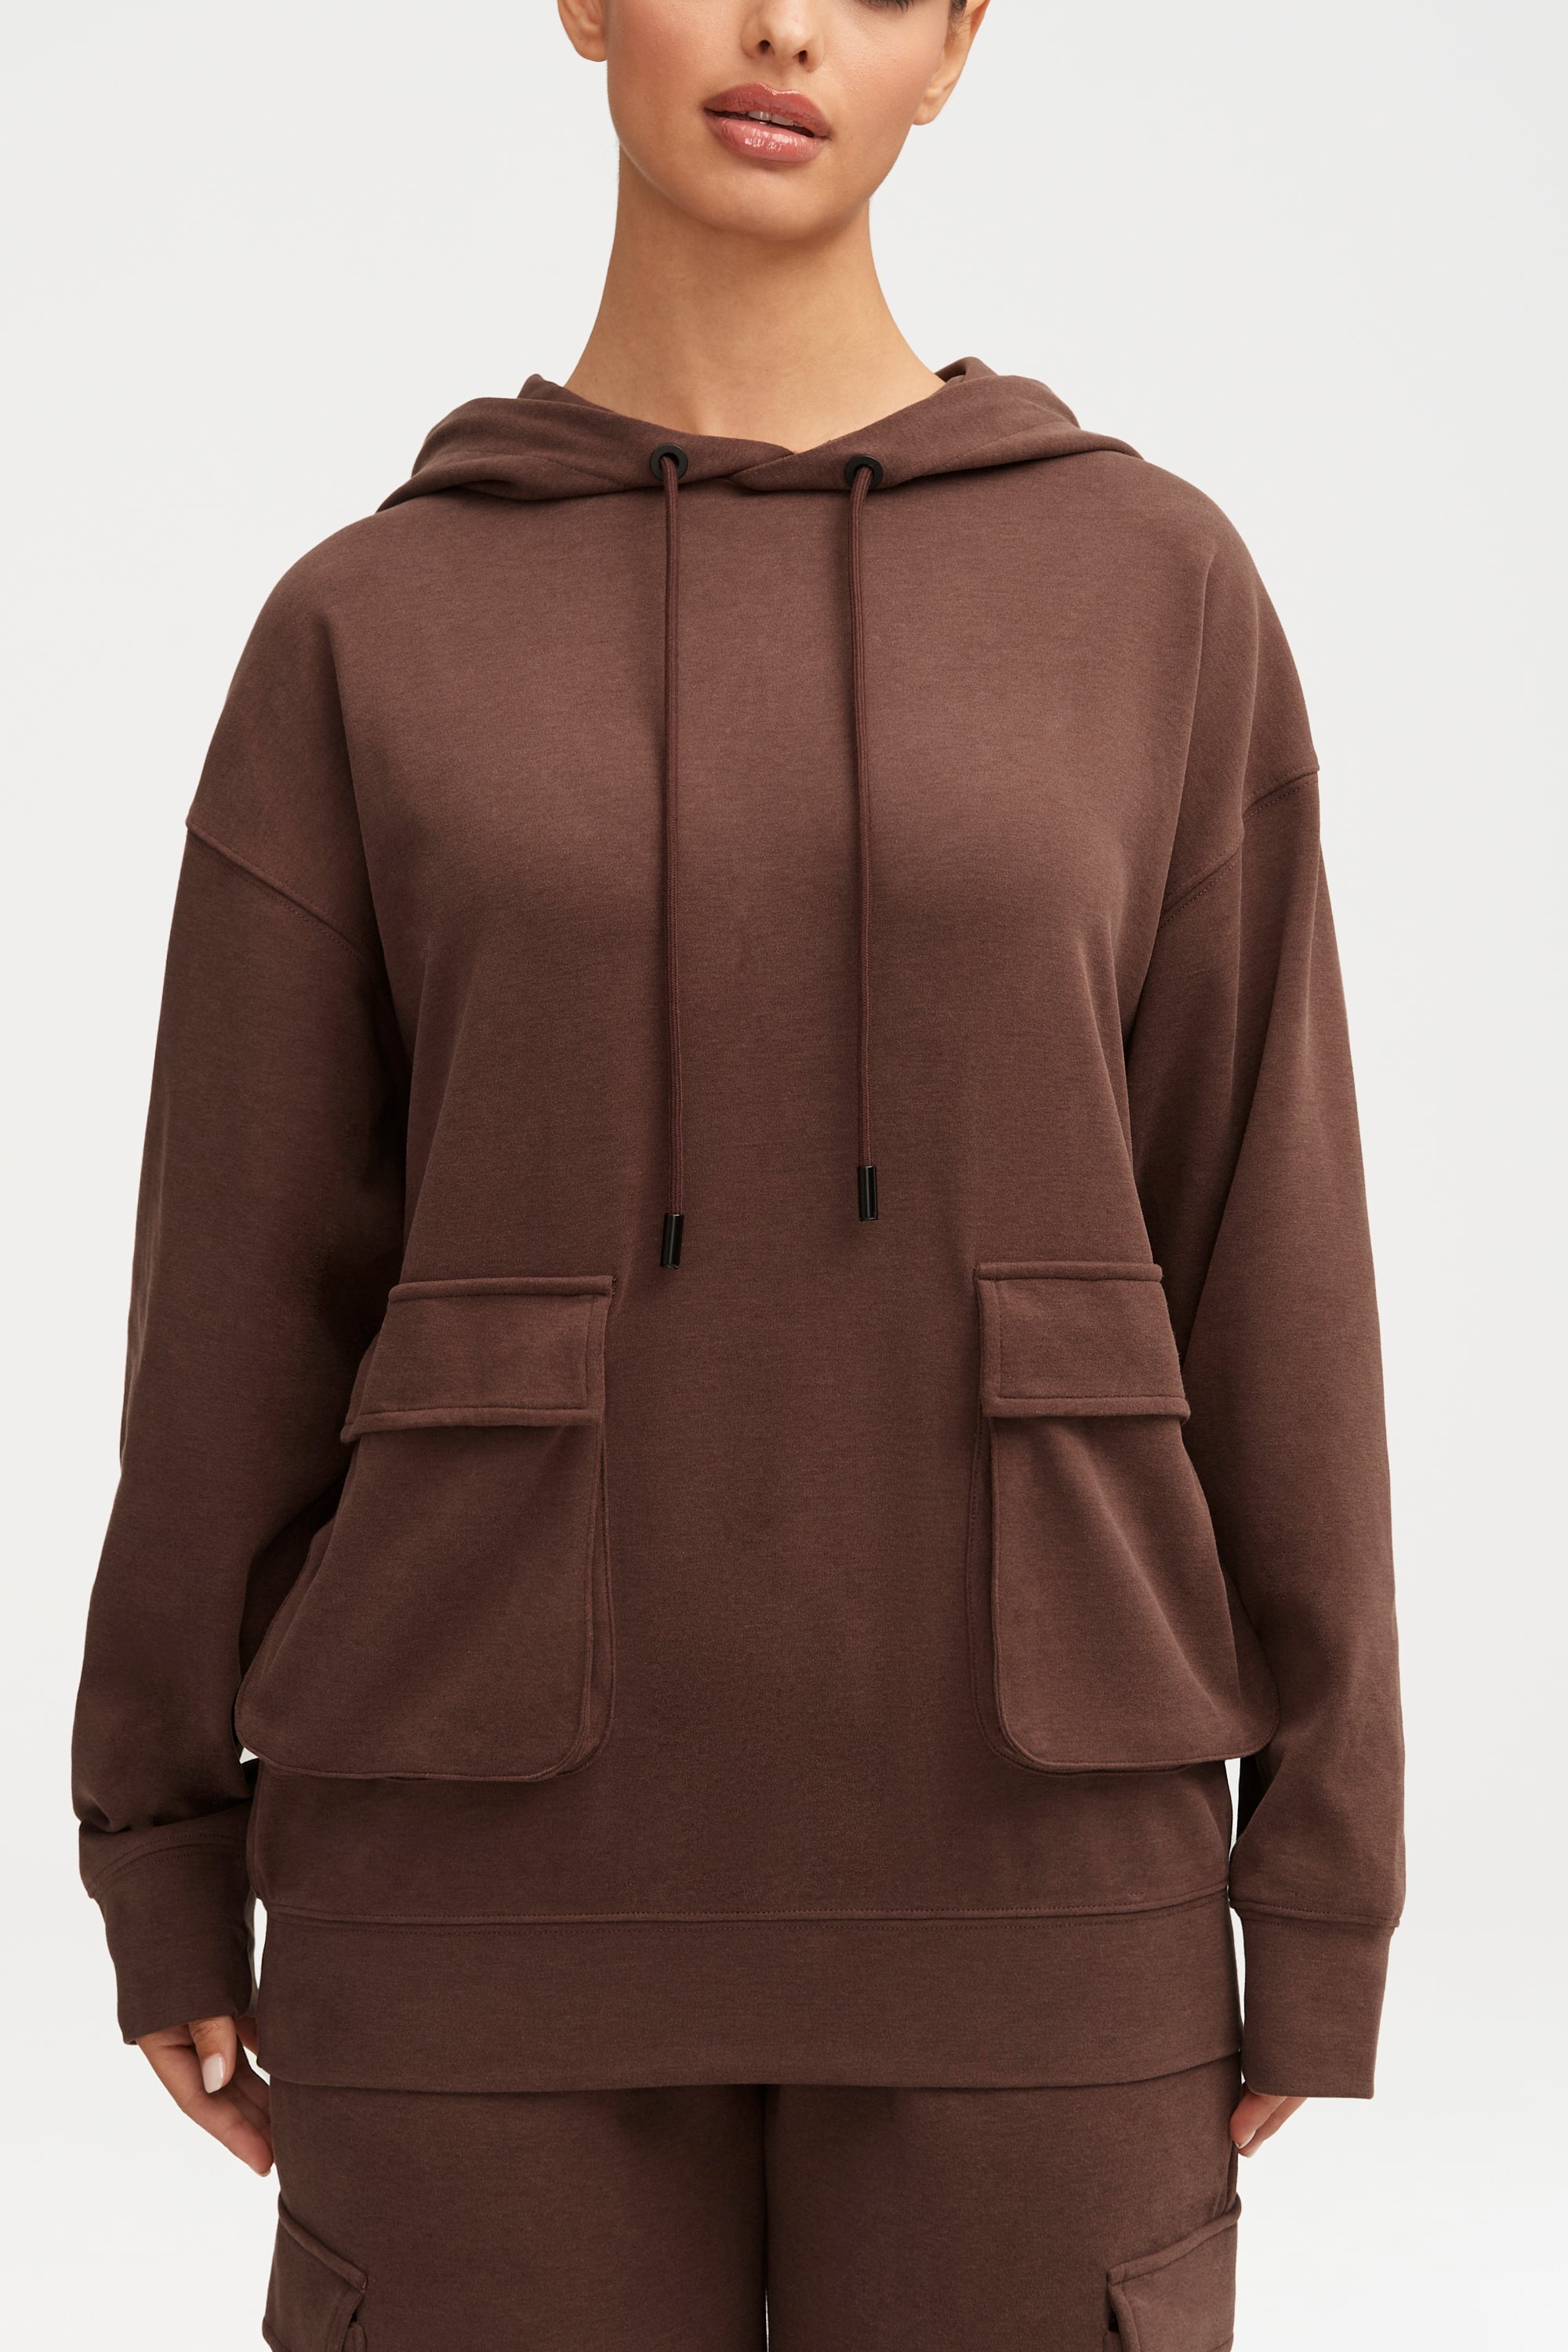 Demi Oversized Cargo Pocket Hoodie - Brown Clothing Veiled 